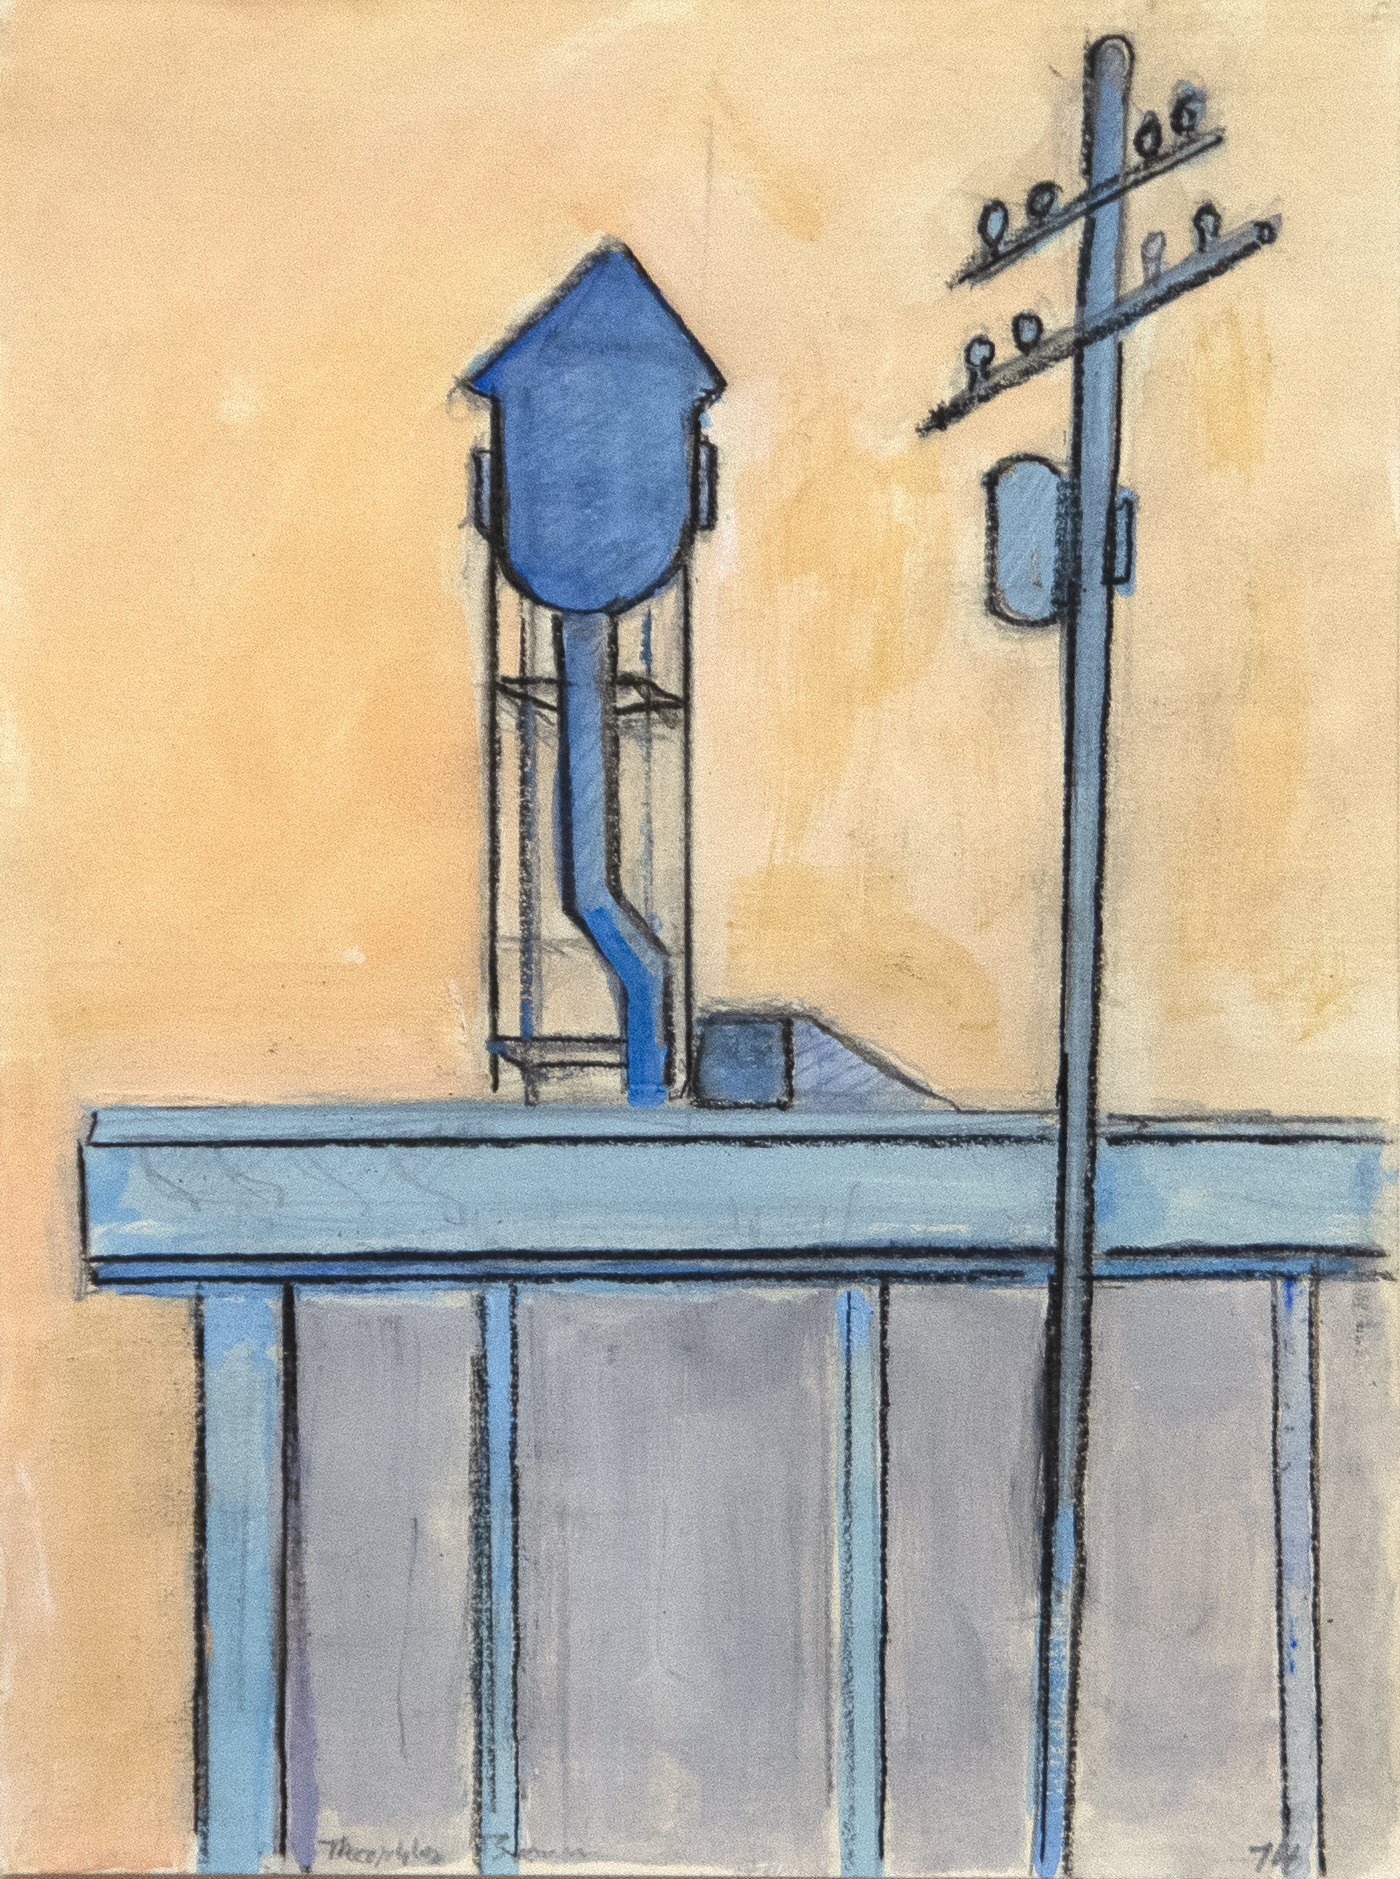 WILLIAM THEOPHILUS BROWN - Blue Tower - mixed media on paper - 7 7/8 x 5 7/8 in.